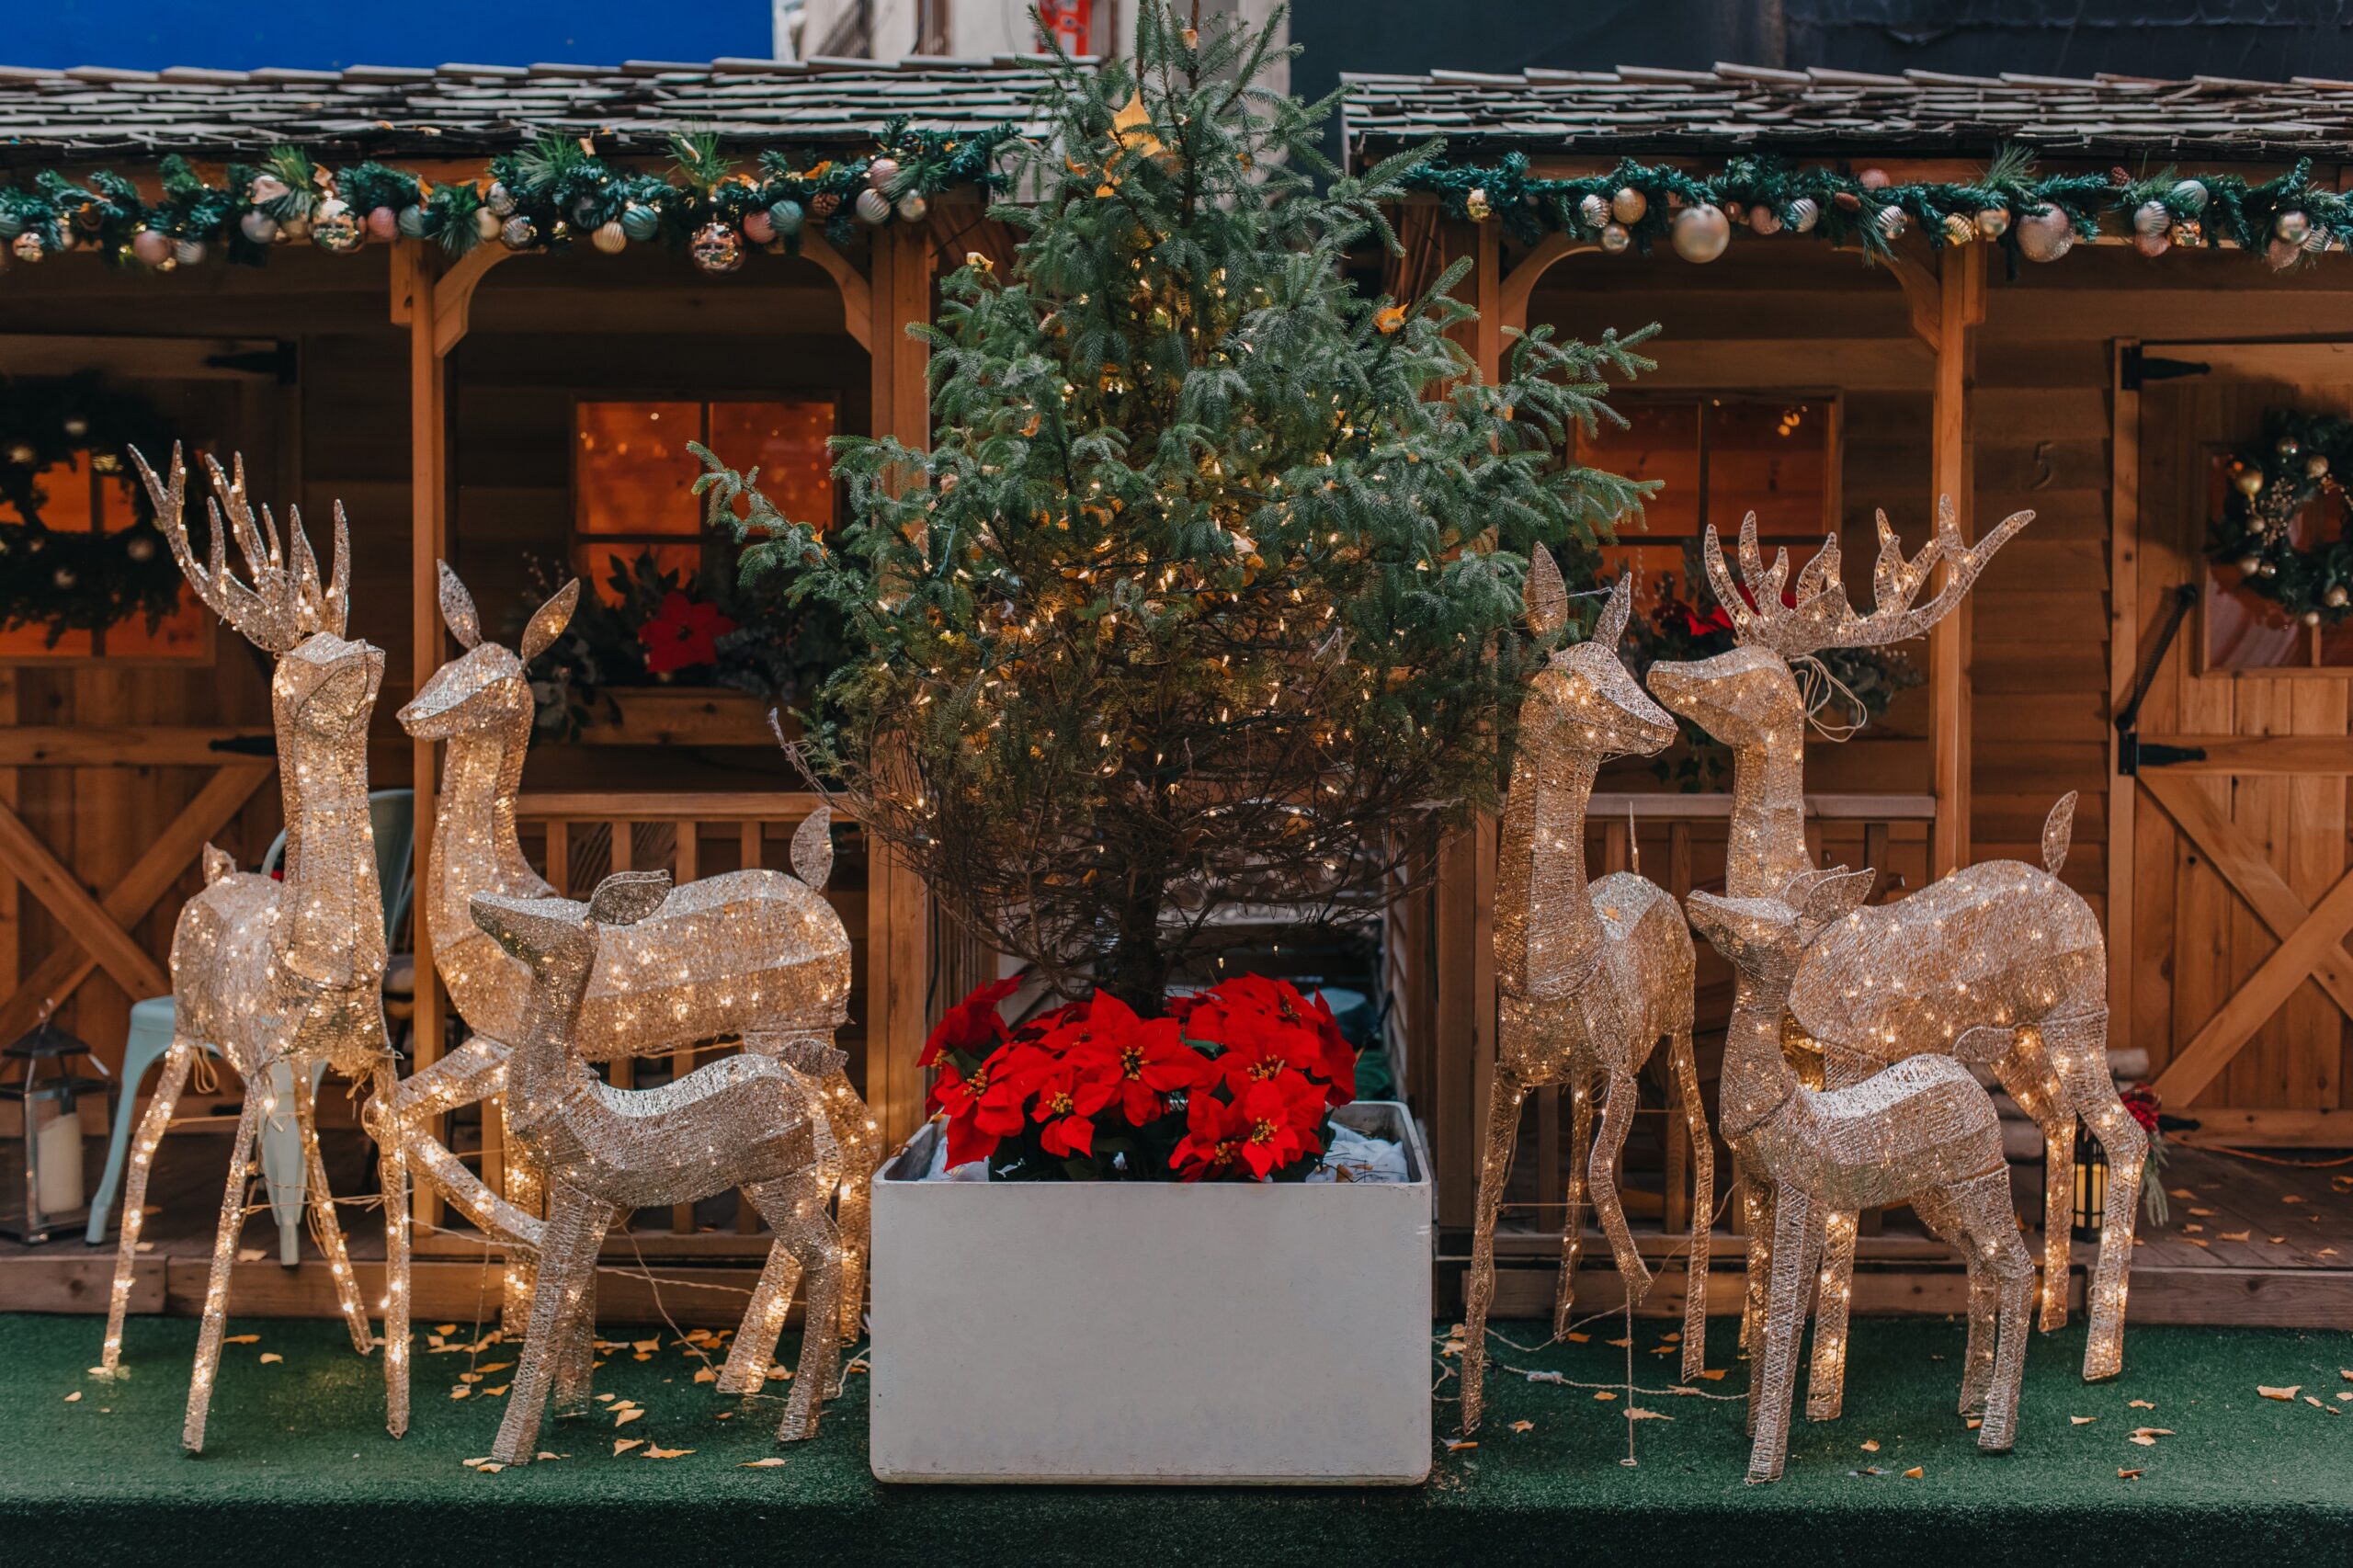 Learn more about Our Favorite Festive Photo Op Spots in NYC